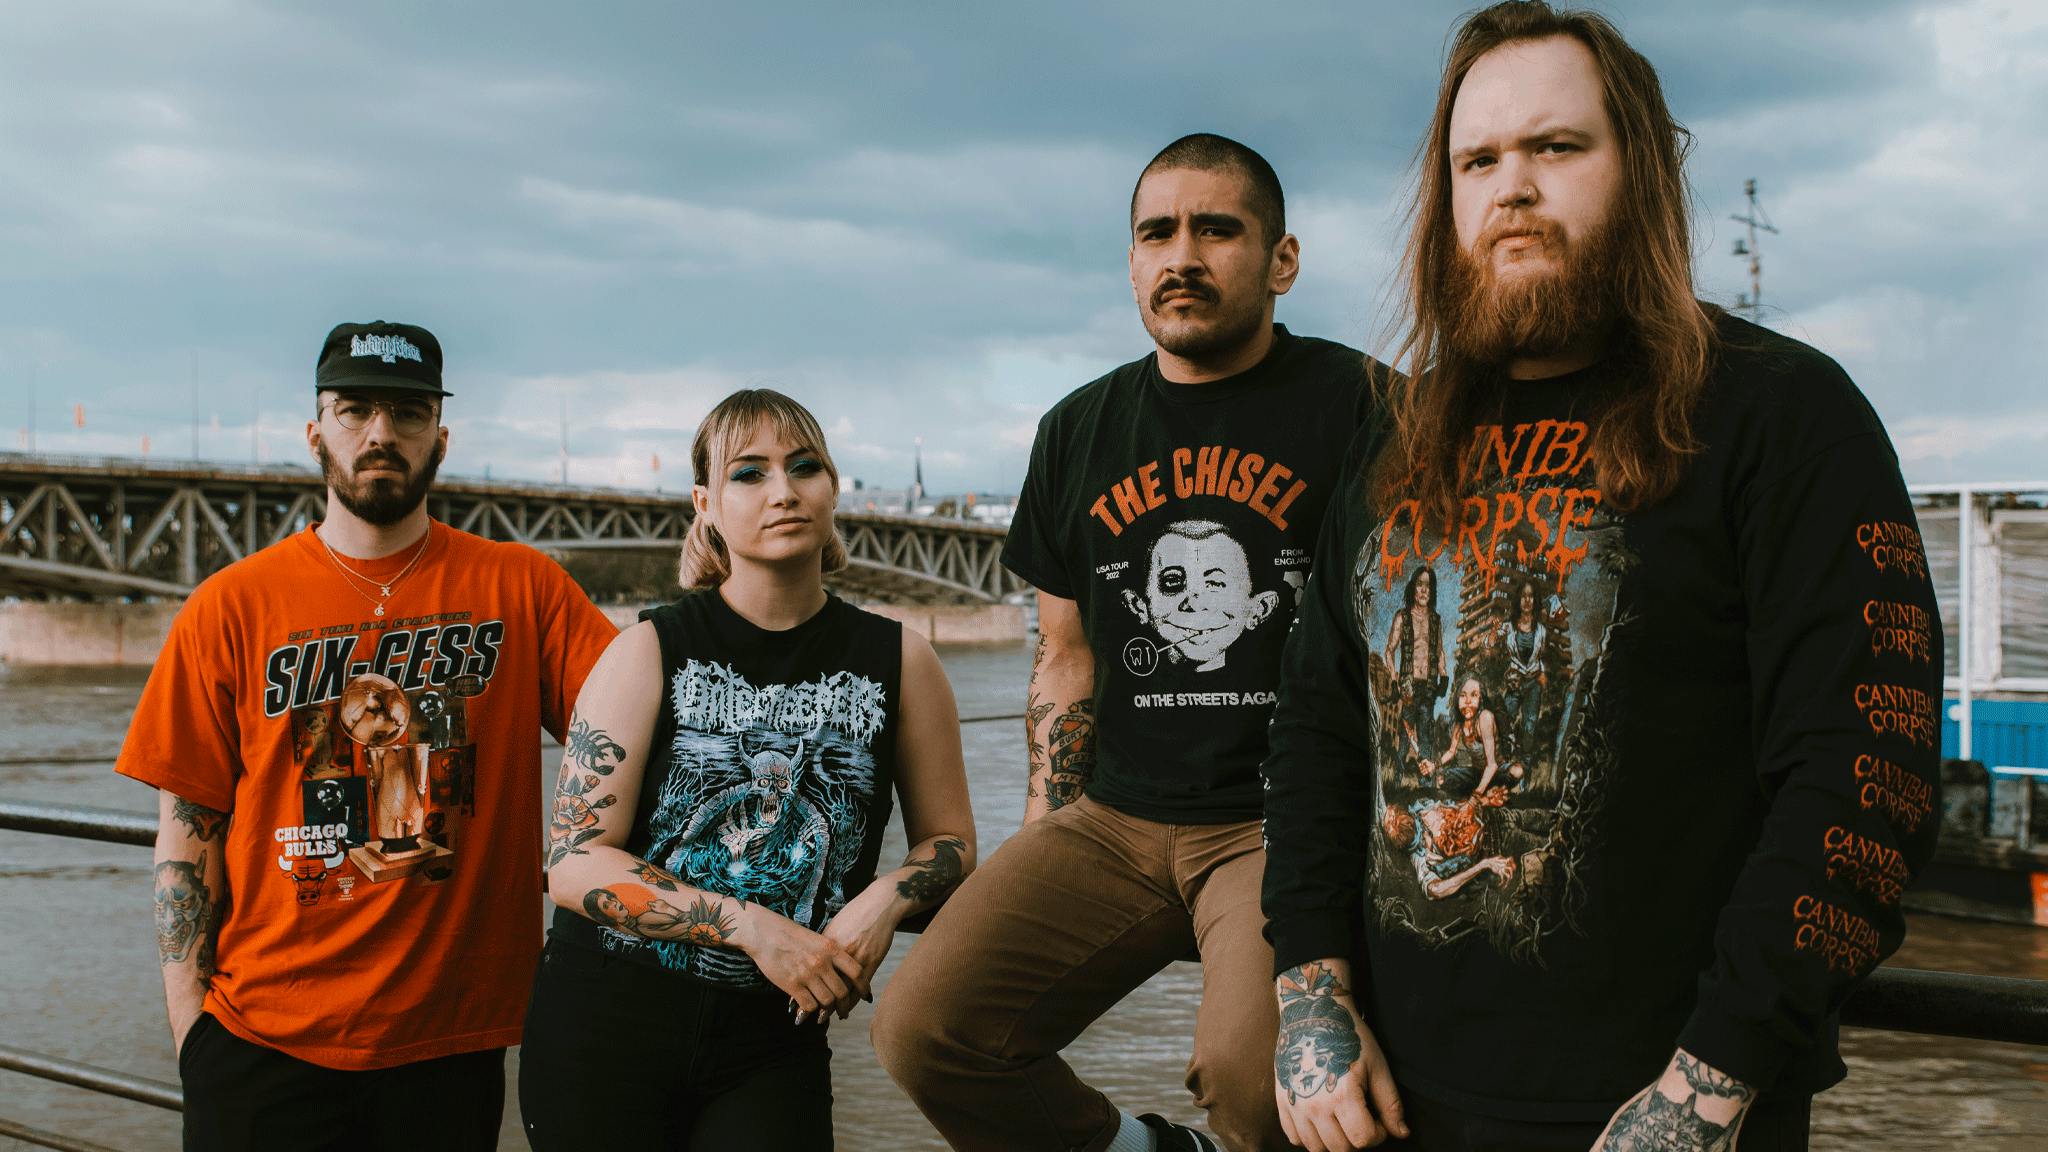 Dying Wish: “We want to become one of the kind of metalcore masters we grew up with”